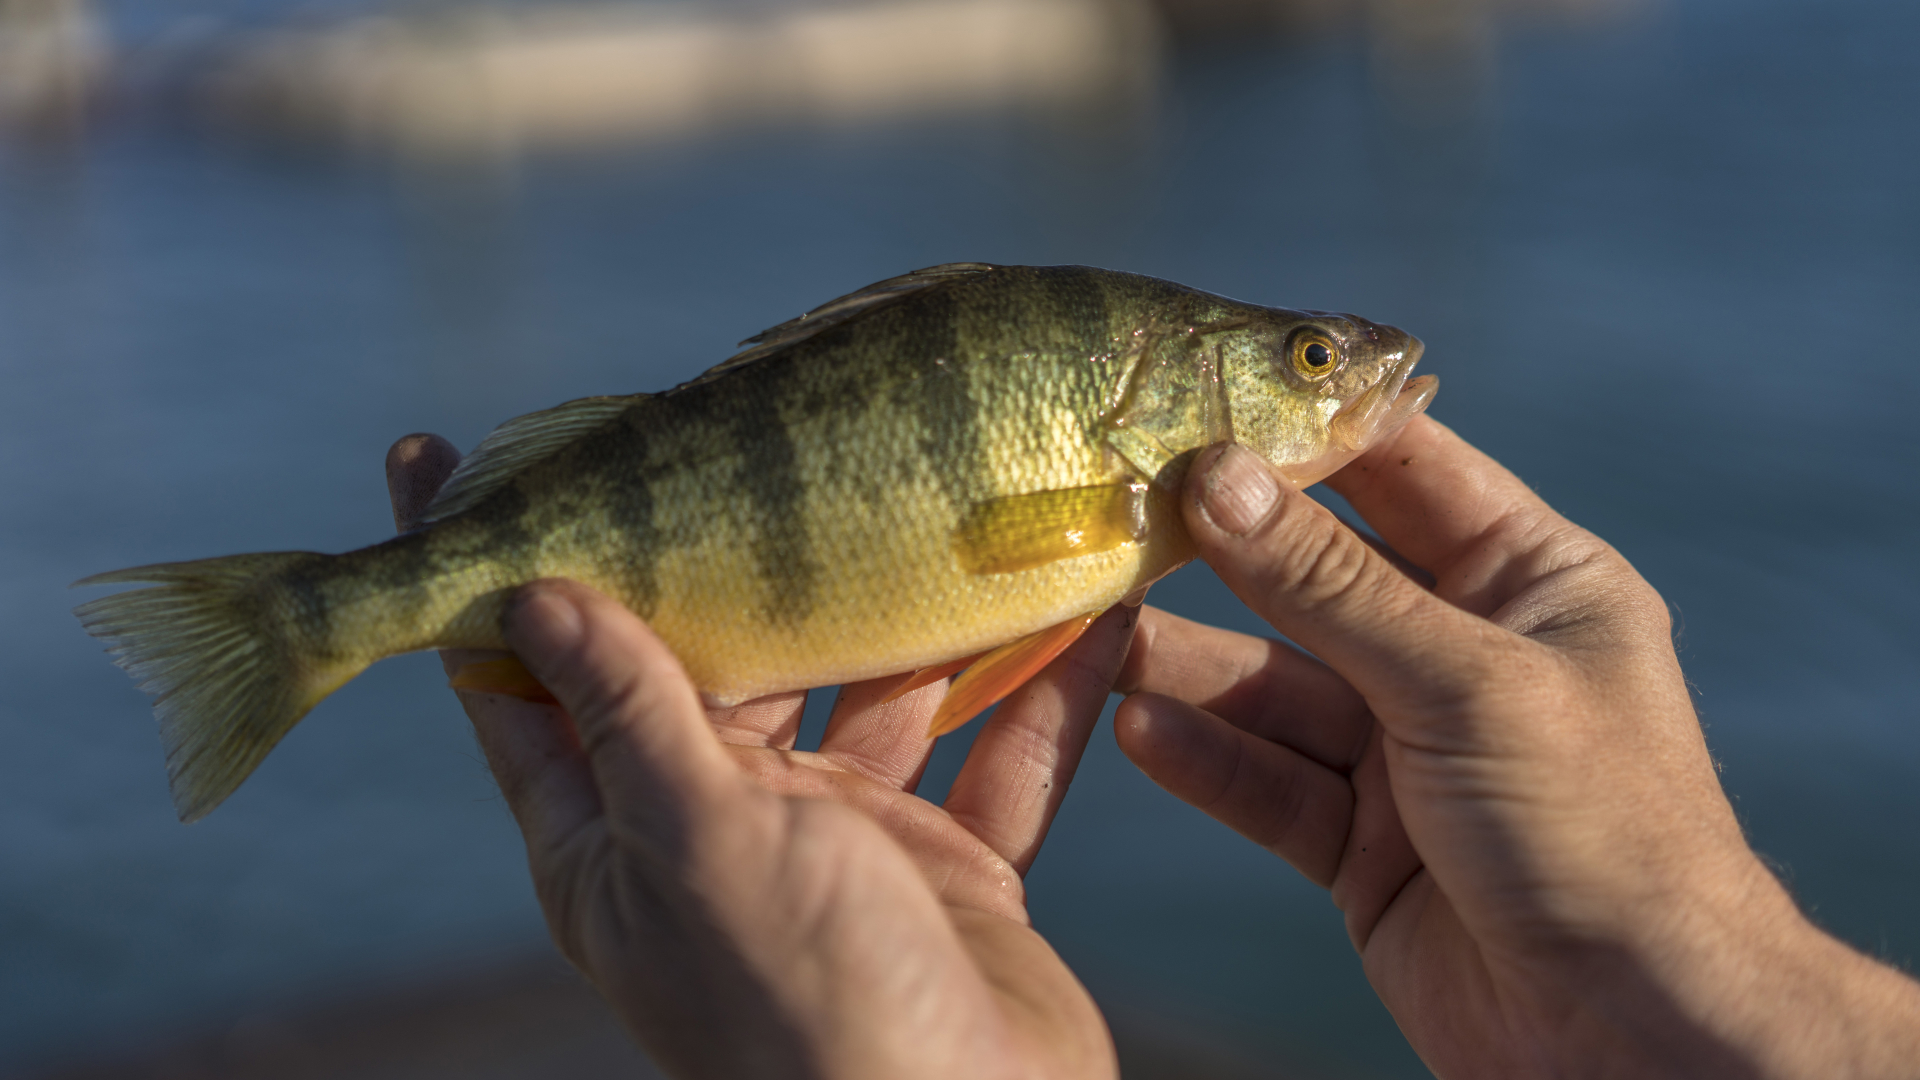 How to catch yellow perch: the best baits, lures and tackle